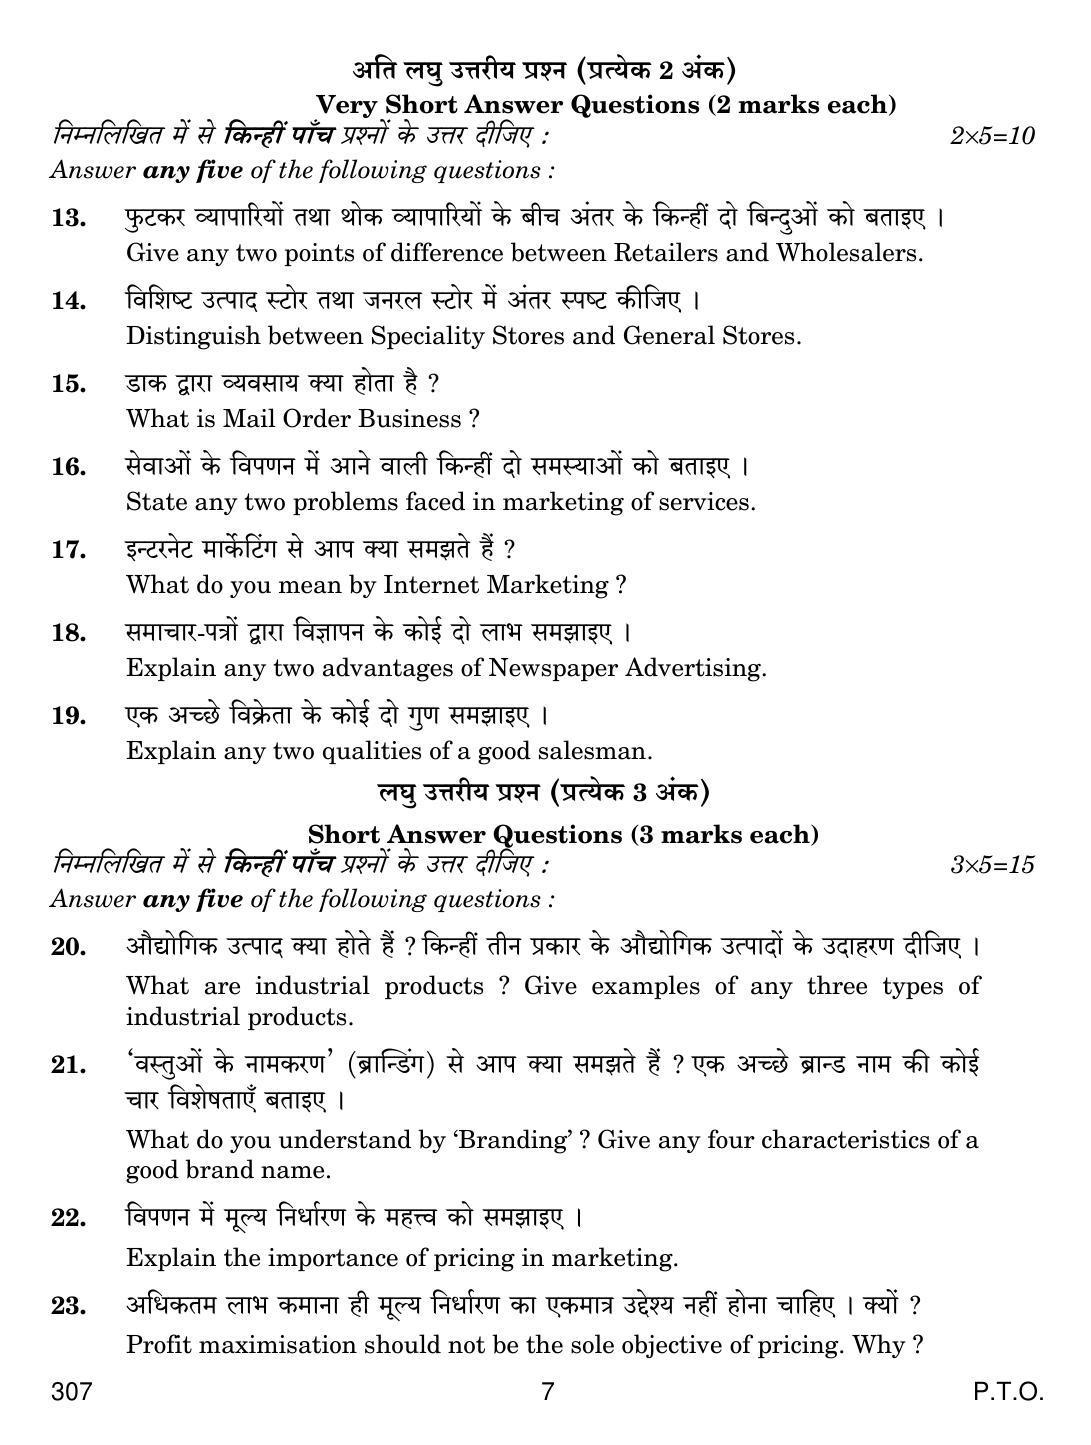 CBSE Class 12 307 Marketing 2019 Question Paper - Page 7